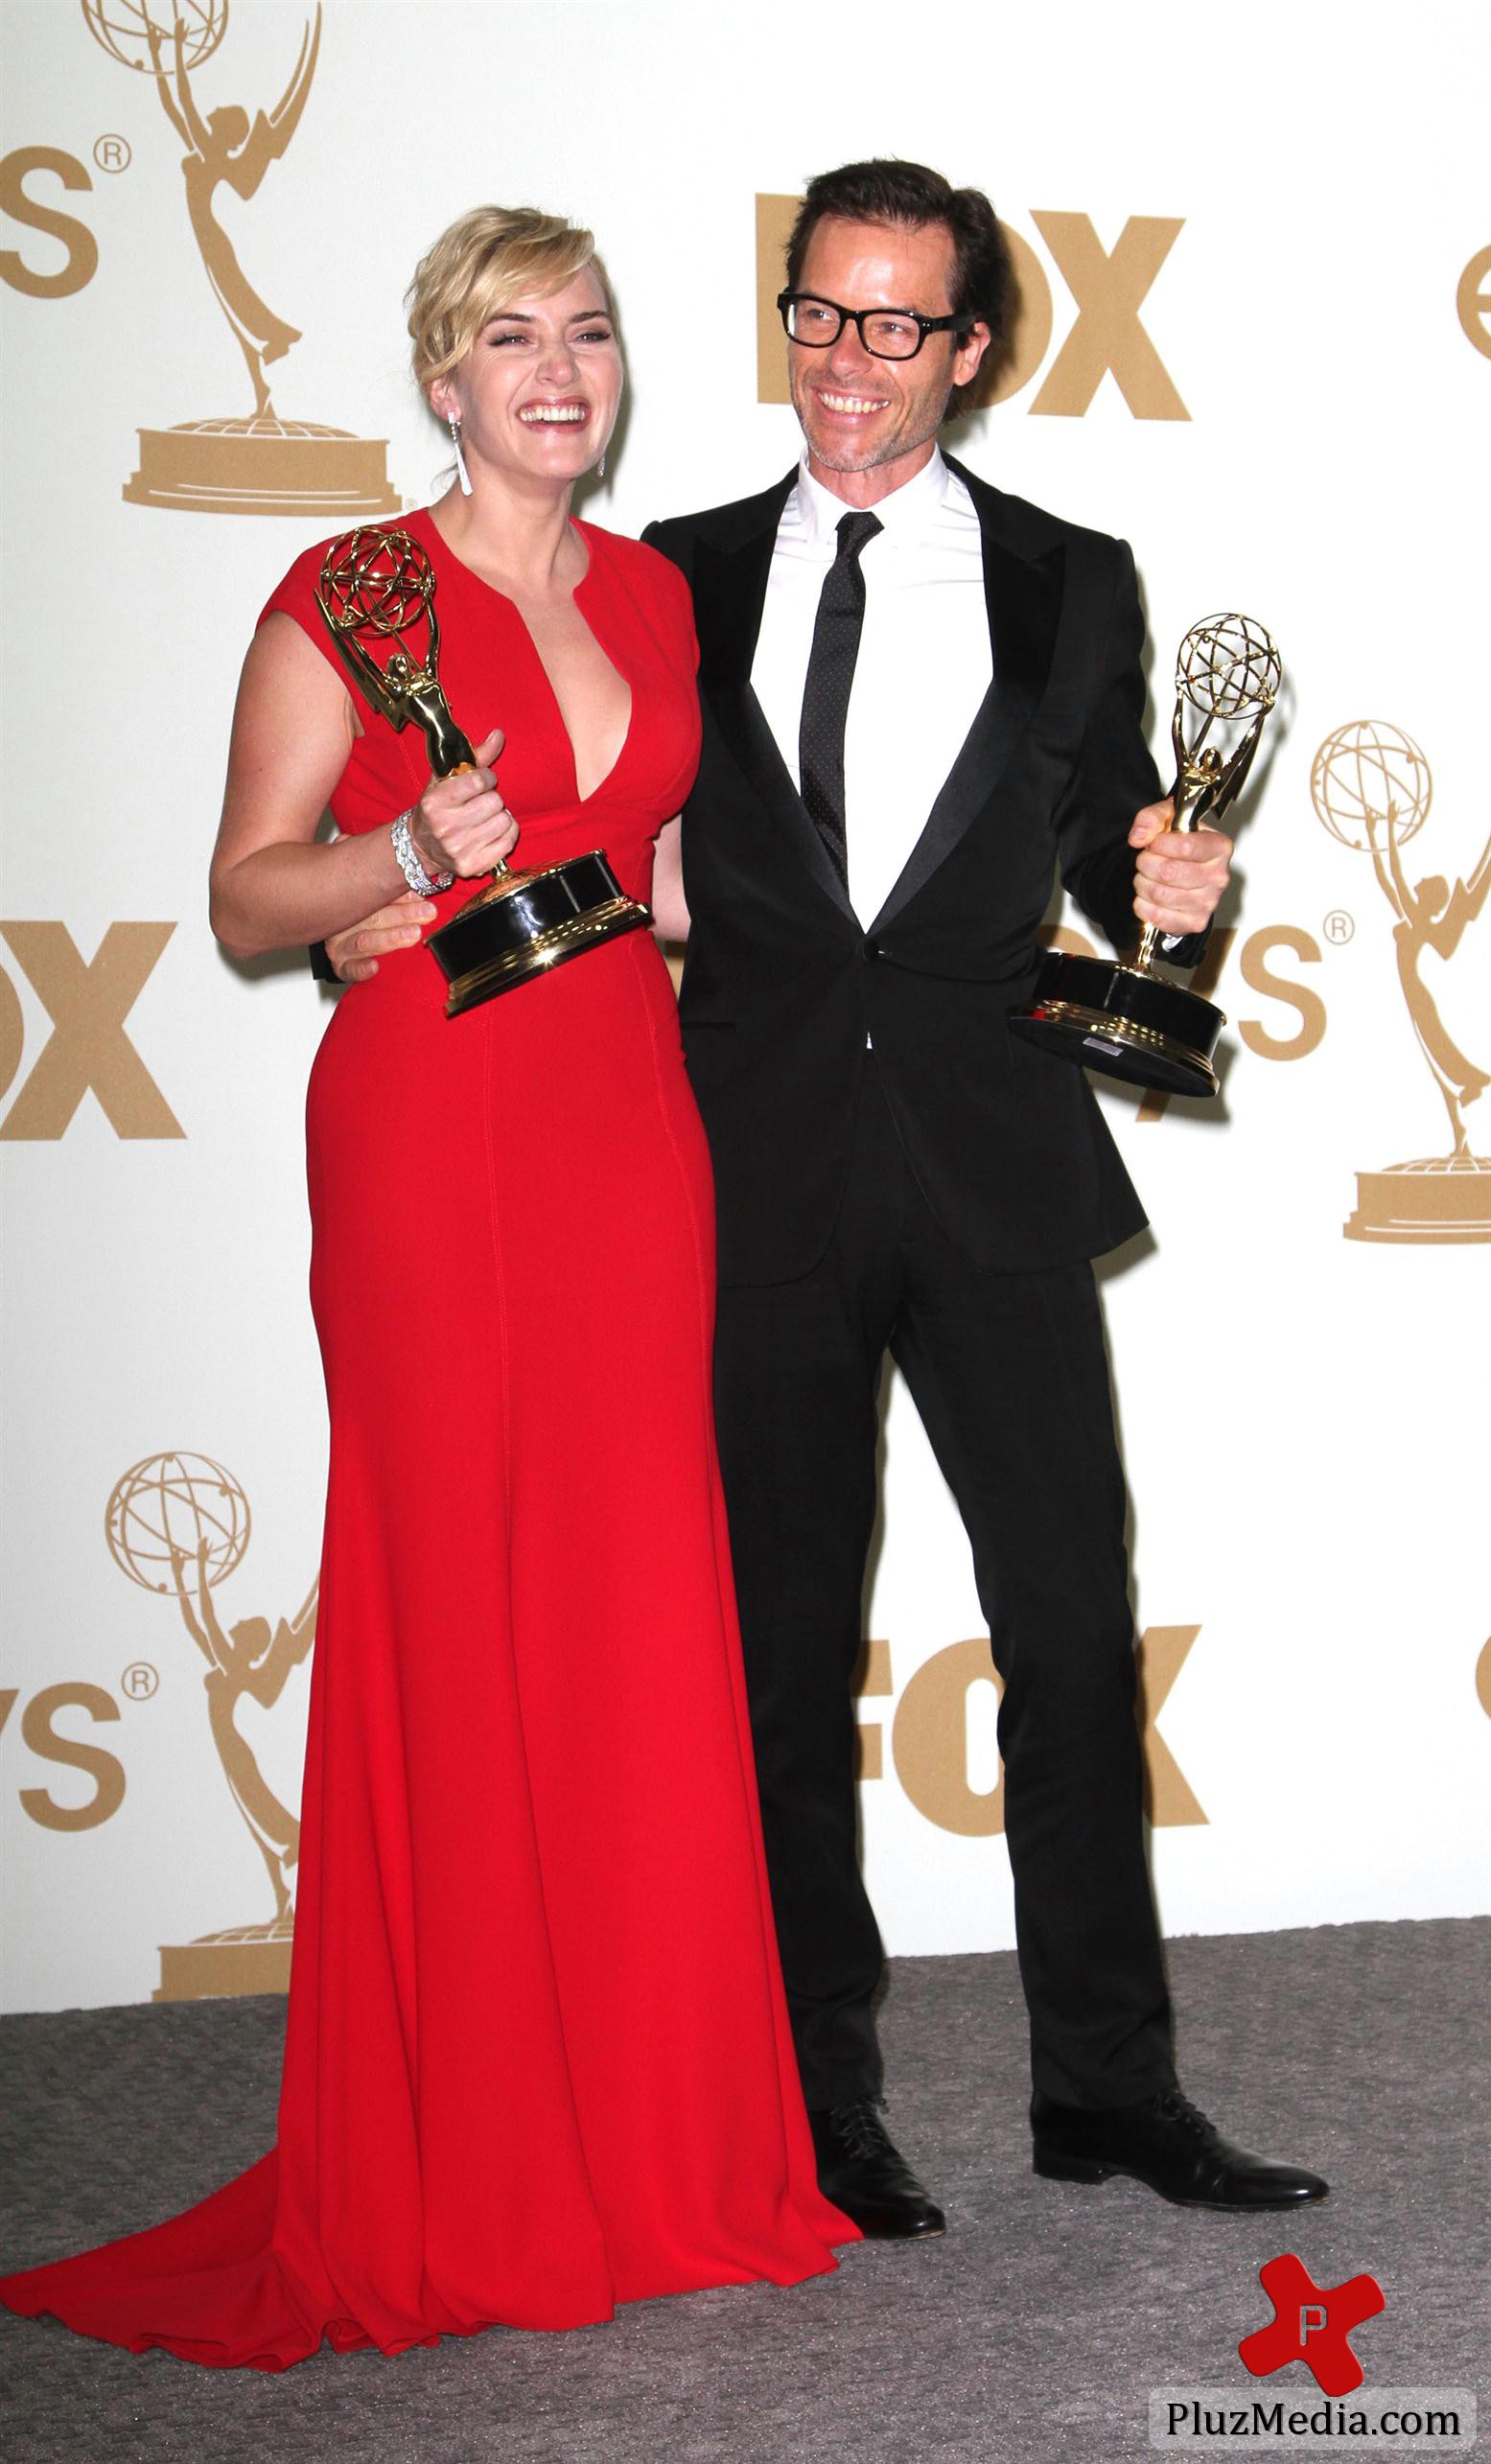 63rd Primetime Emmy Awards held at the Nokia Theater LA LIVE photos | Picture 81249